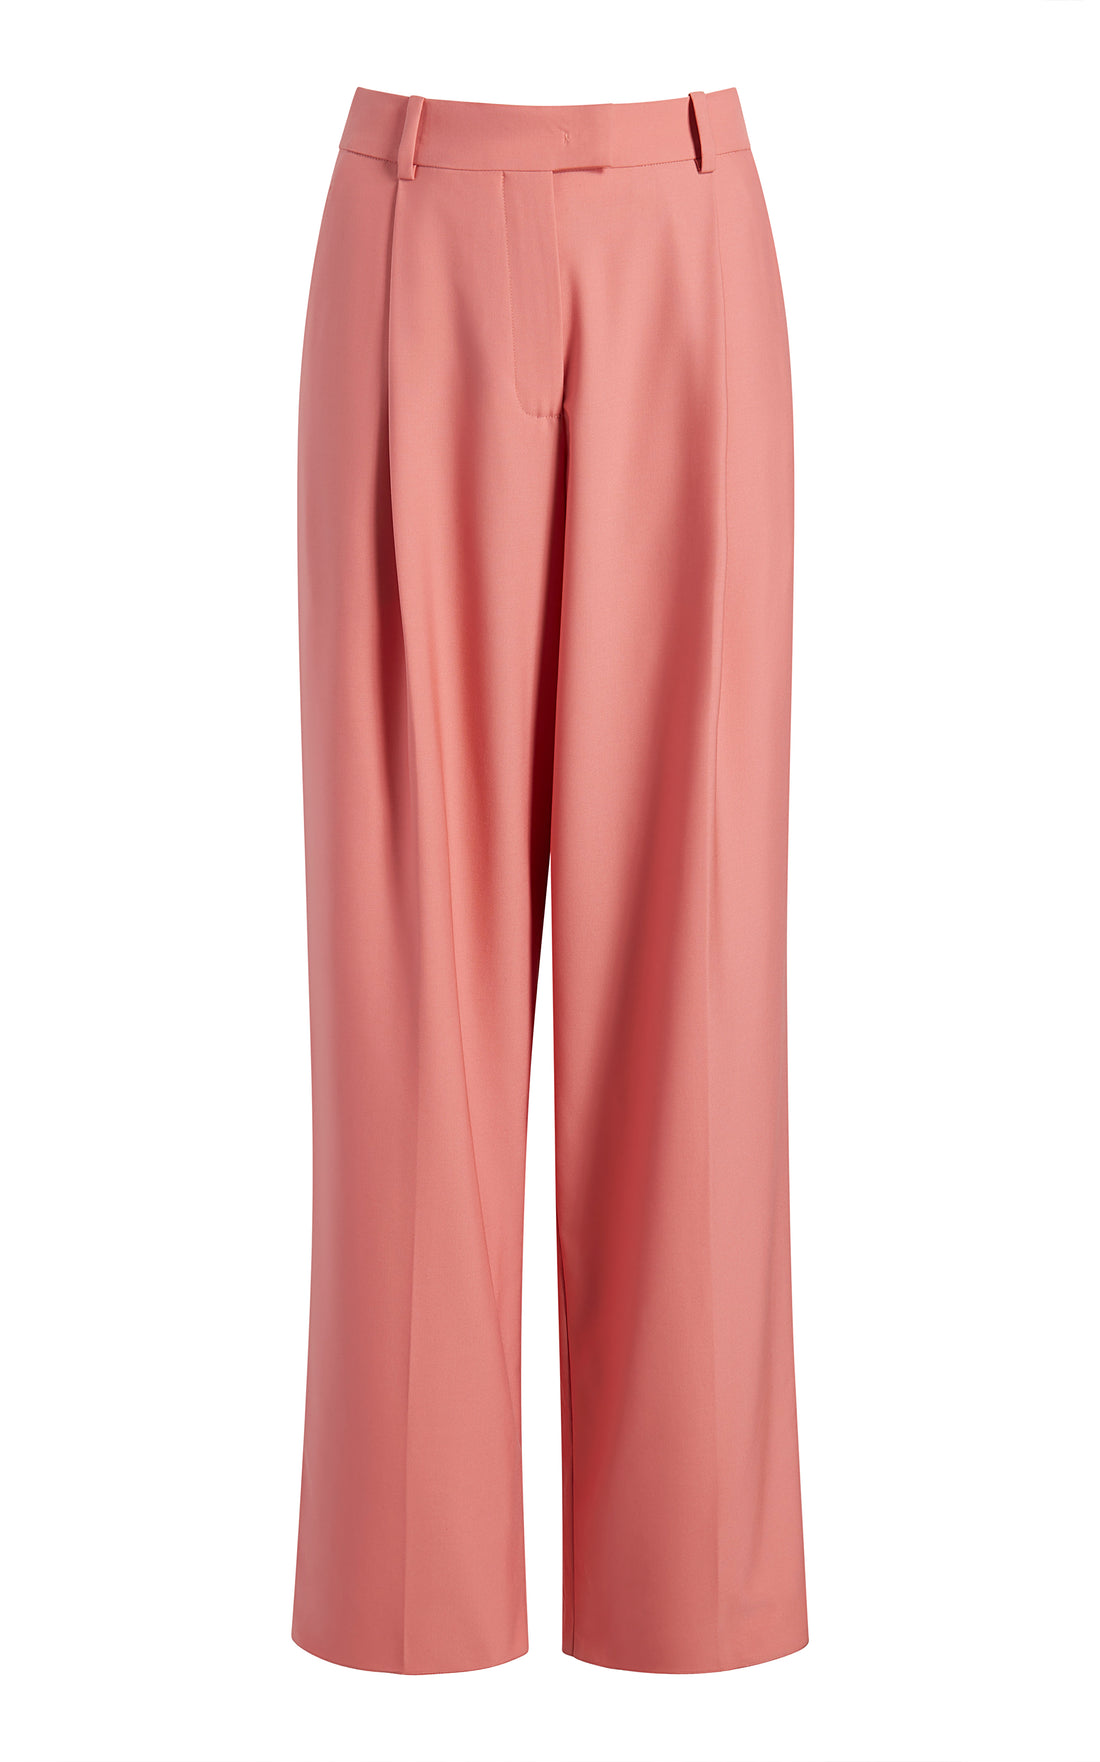 Product image46 with color pink